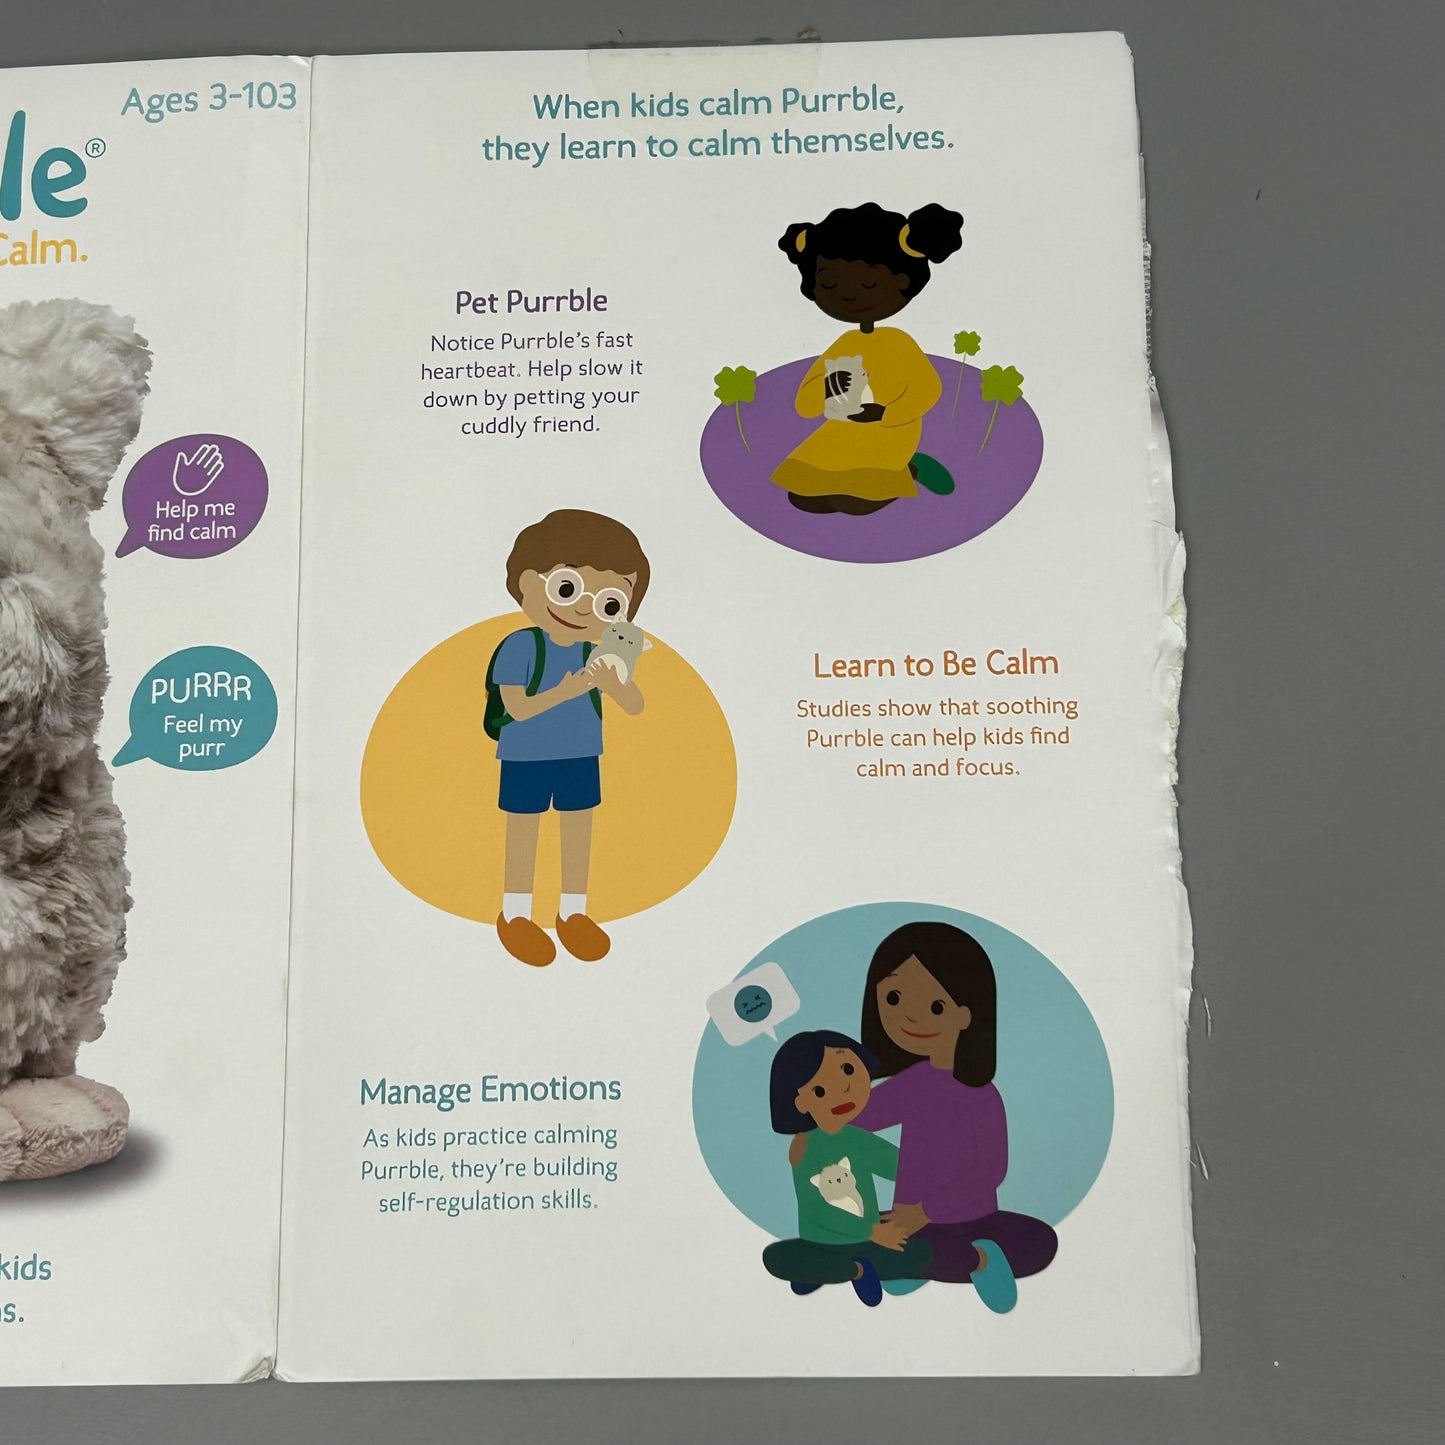 ZA@ SPROUTEL Toy Gray Purrble Interactive Friend who helps kids find calm and manage emotions (Preowned and Damaged)